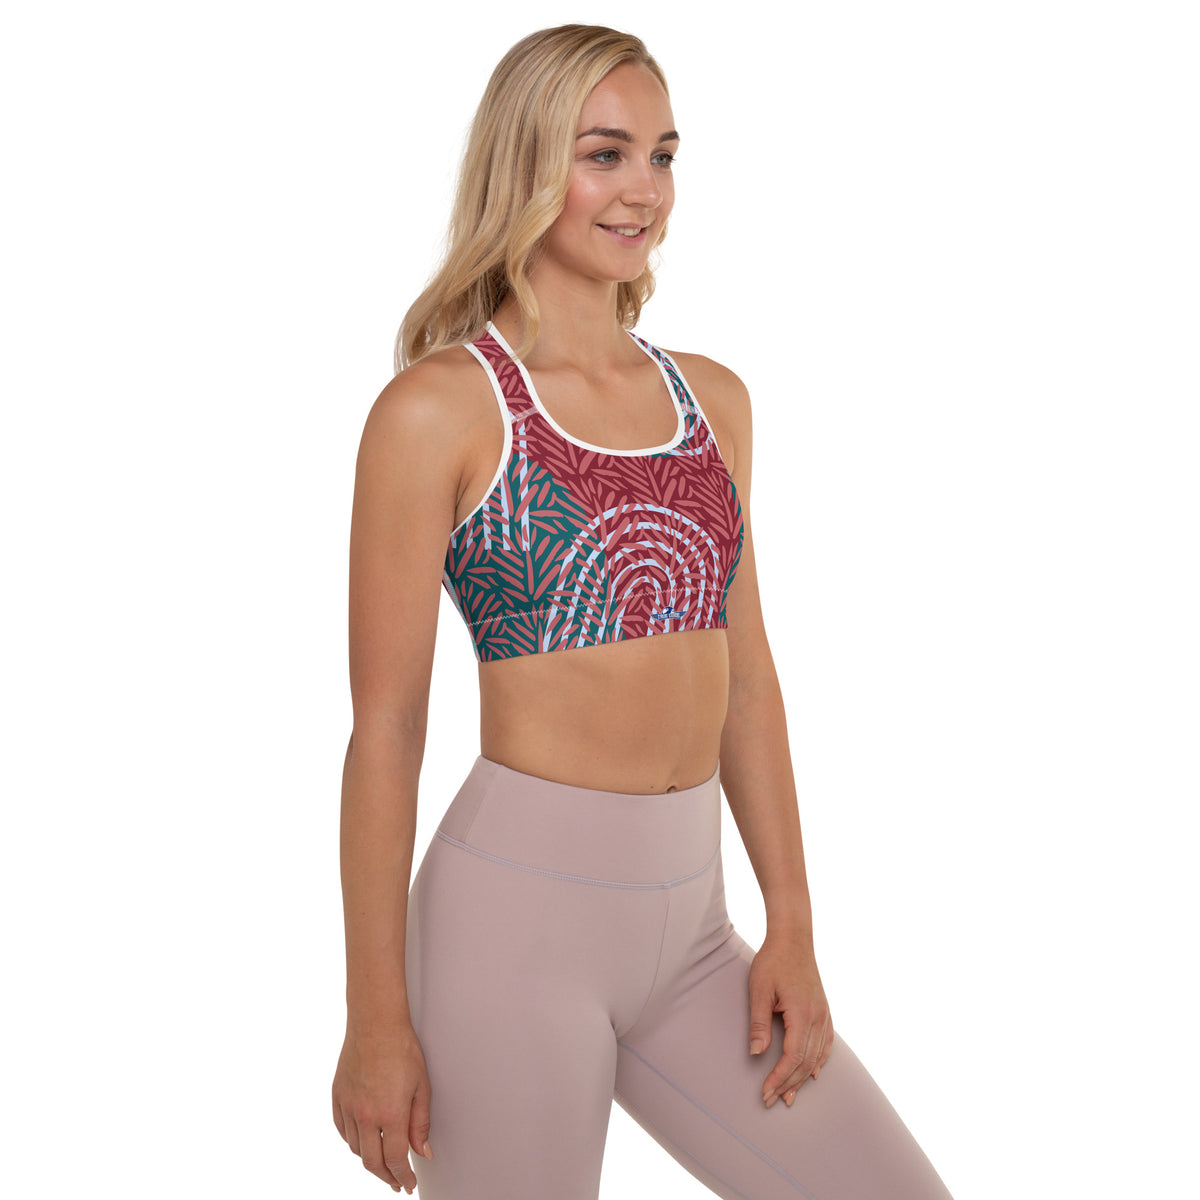 TG Two Toned Padded Sports Bra